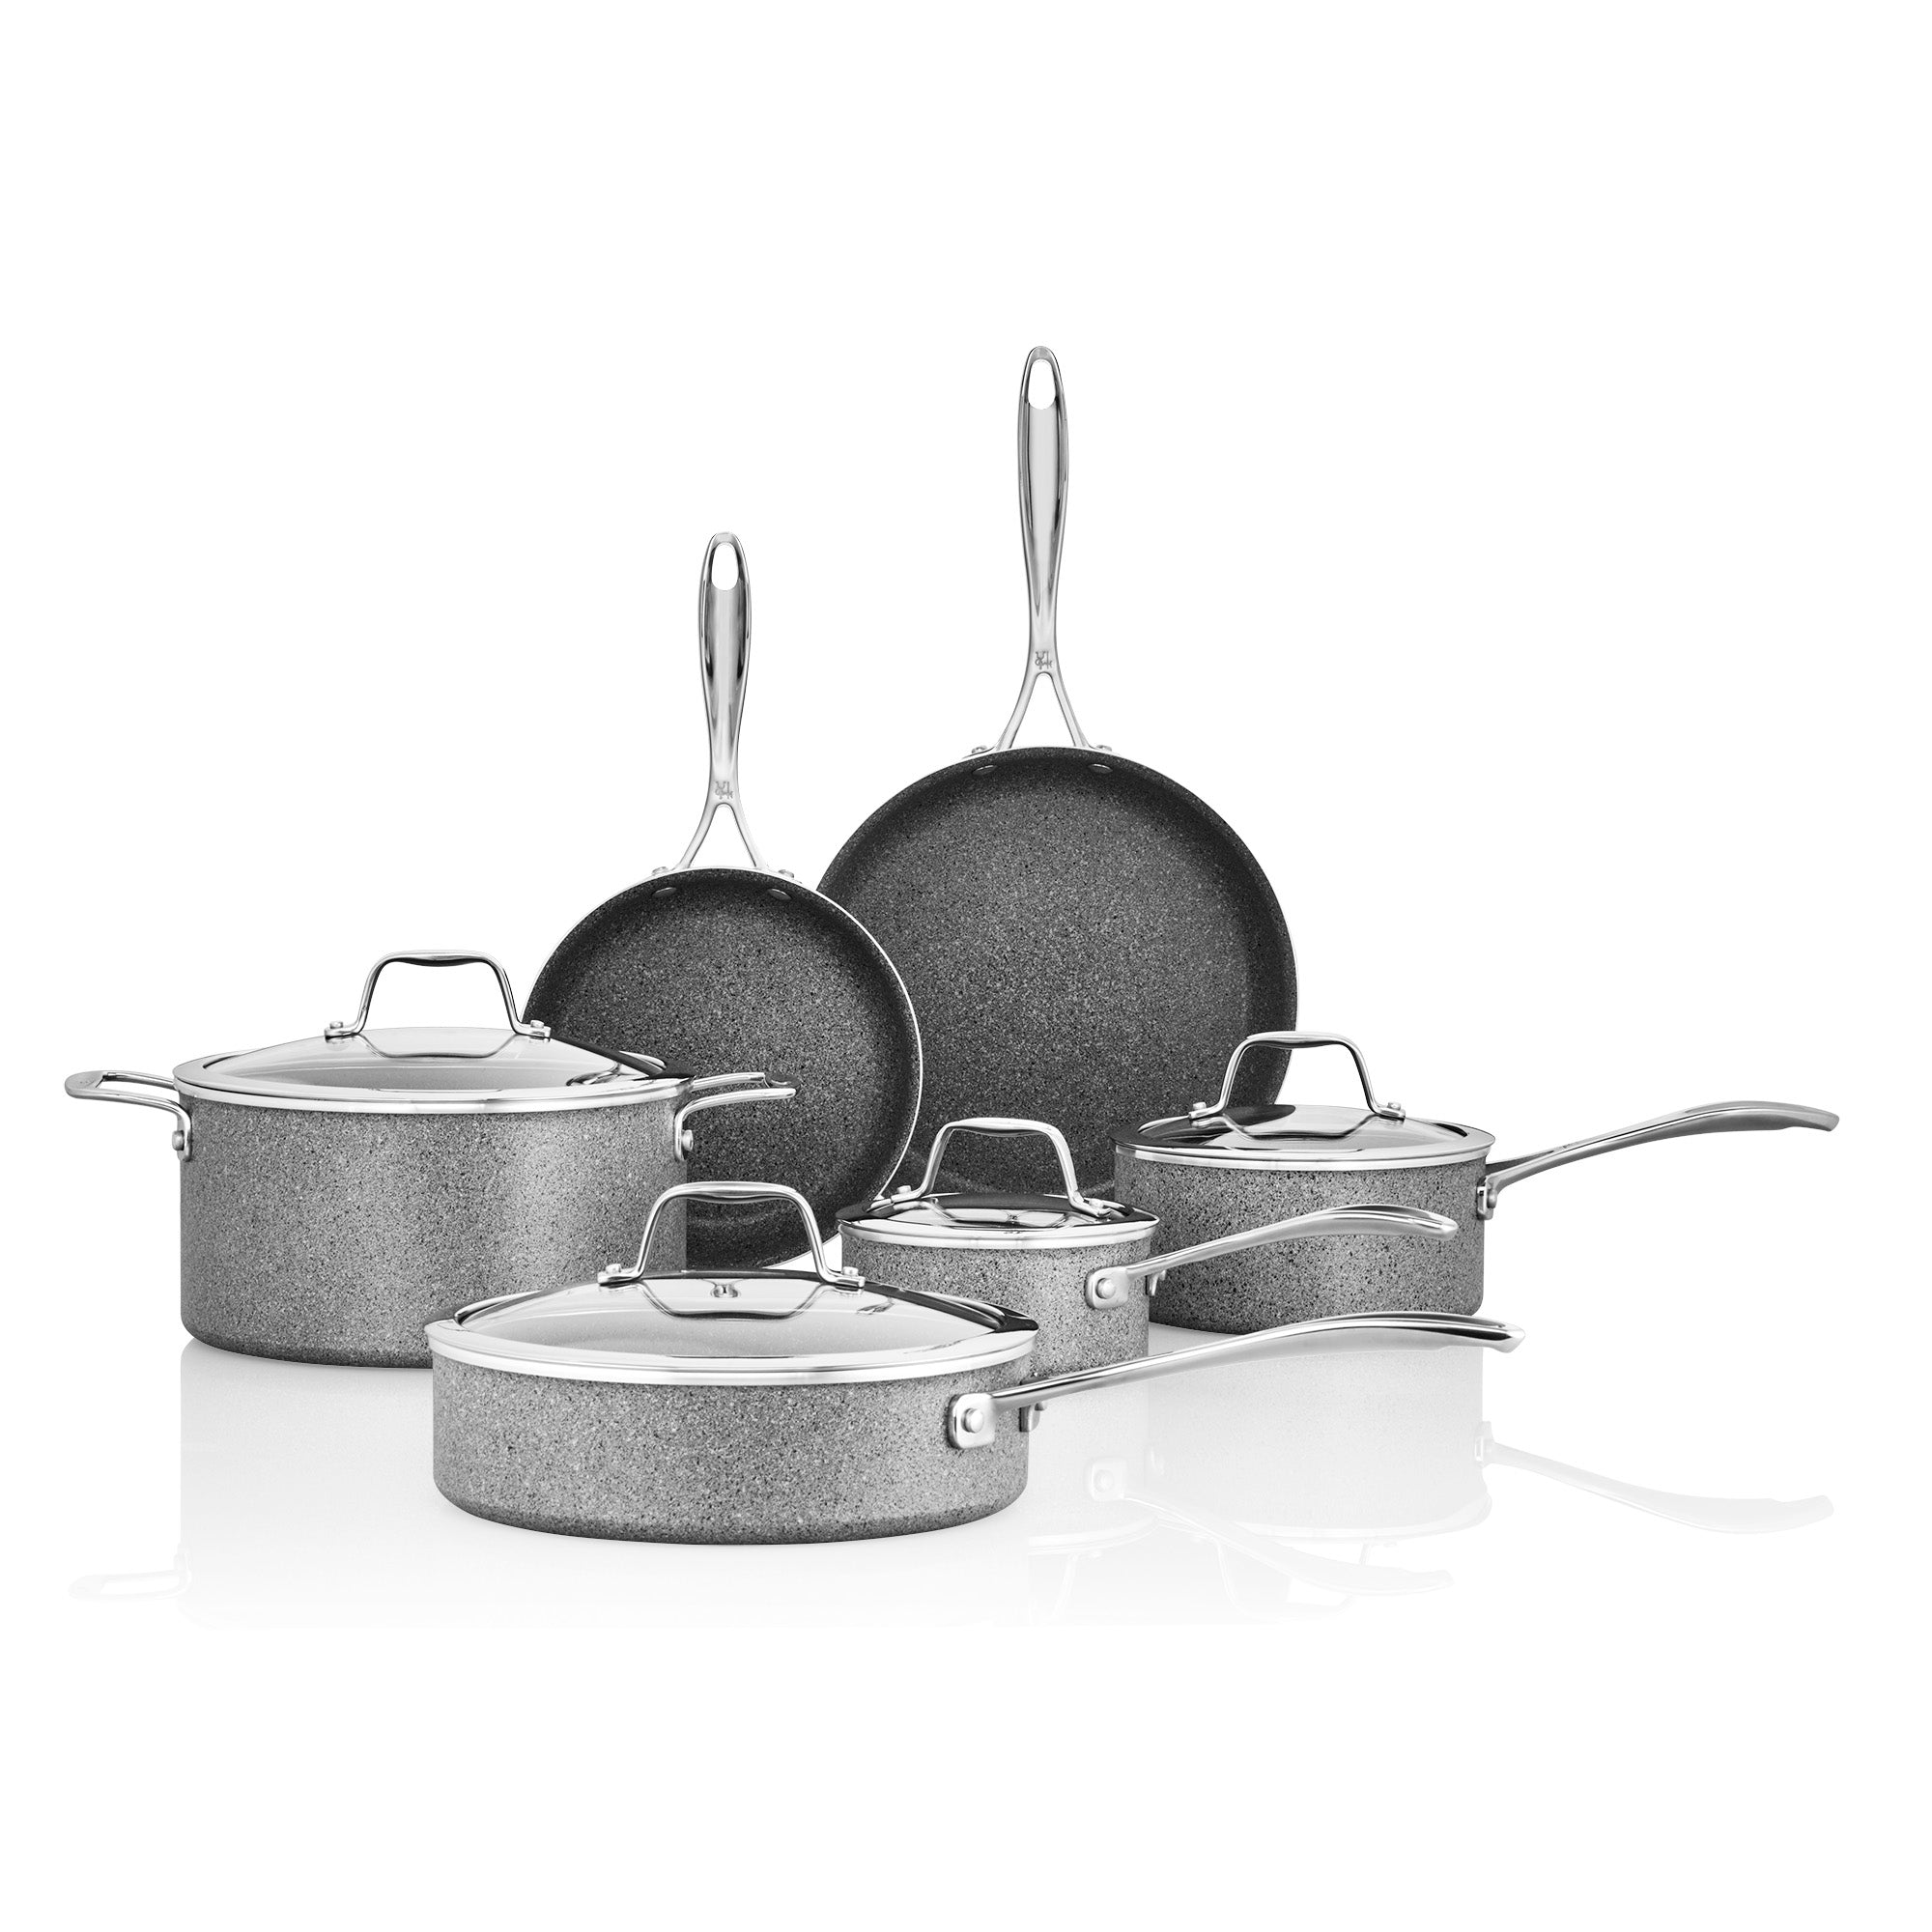  Ballarini Parma Plus by HENCKELS 10-pc Aluminum Nonstick  Cookware Set, Made in Italy: Home & Kitchen